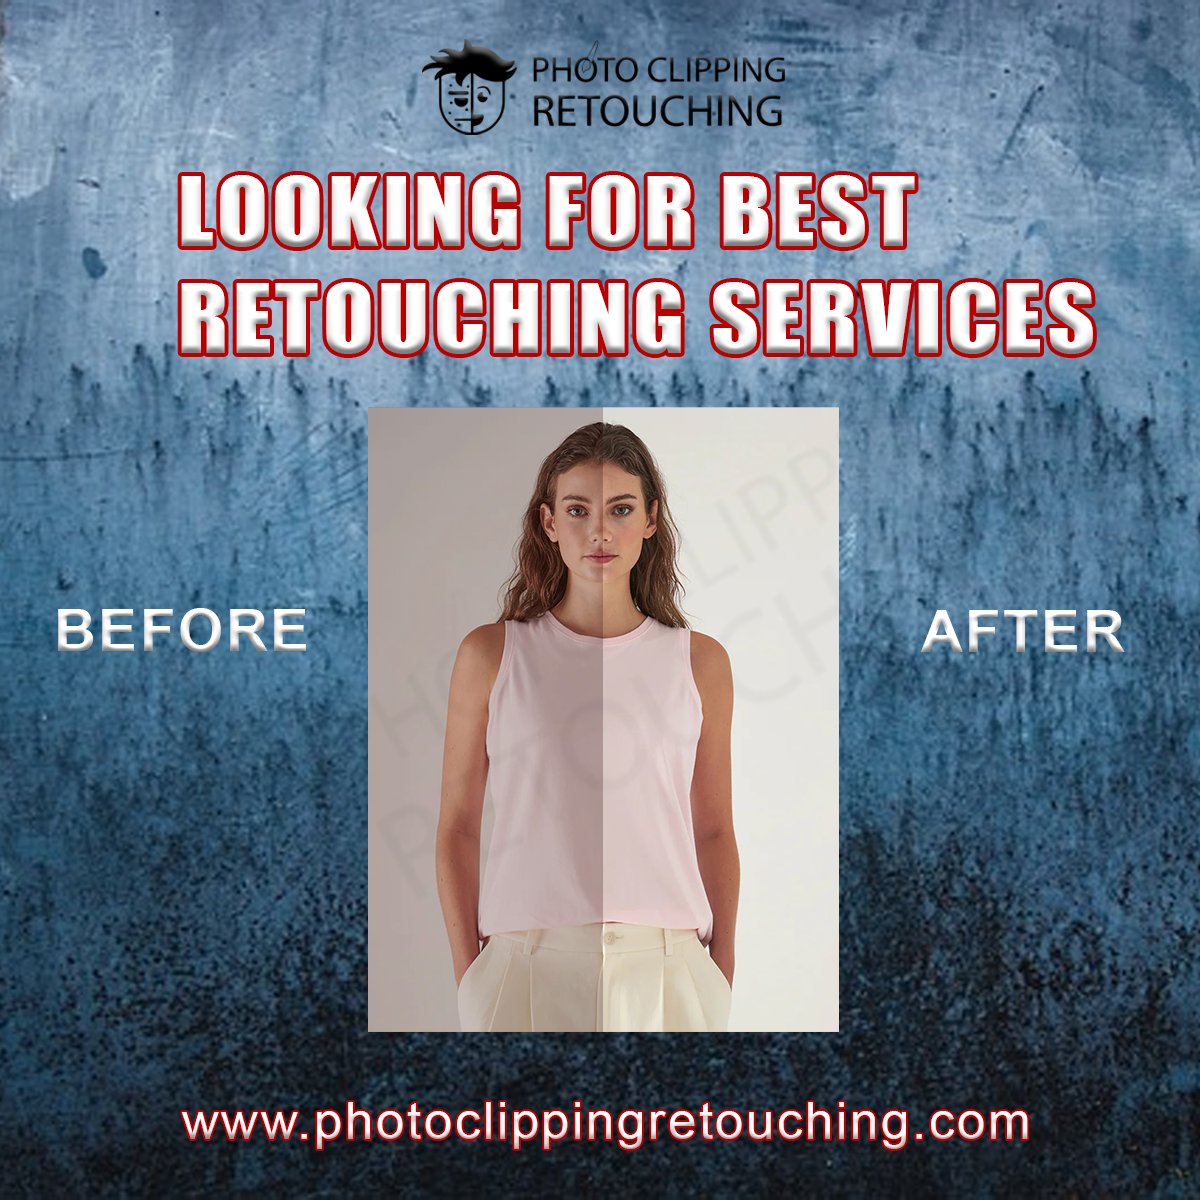 Let your photos speak volumes with our Image Retouching Service.
#ImageRetouching #RetouchingService #VisualMakeover #RetouchedImages #PhotoEditing #EditingServices #GraphicDesign #teamPCR

Email: info@photoclippingretouching.com
Link: photoclippingretouching.com/photography-ch…